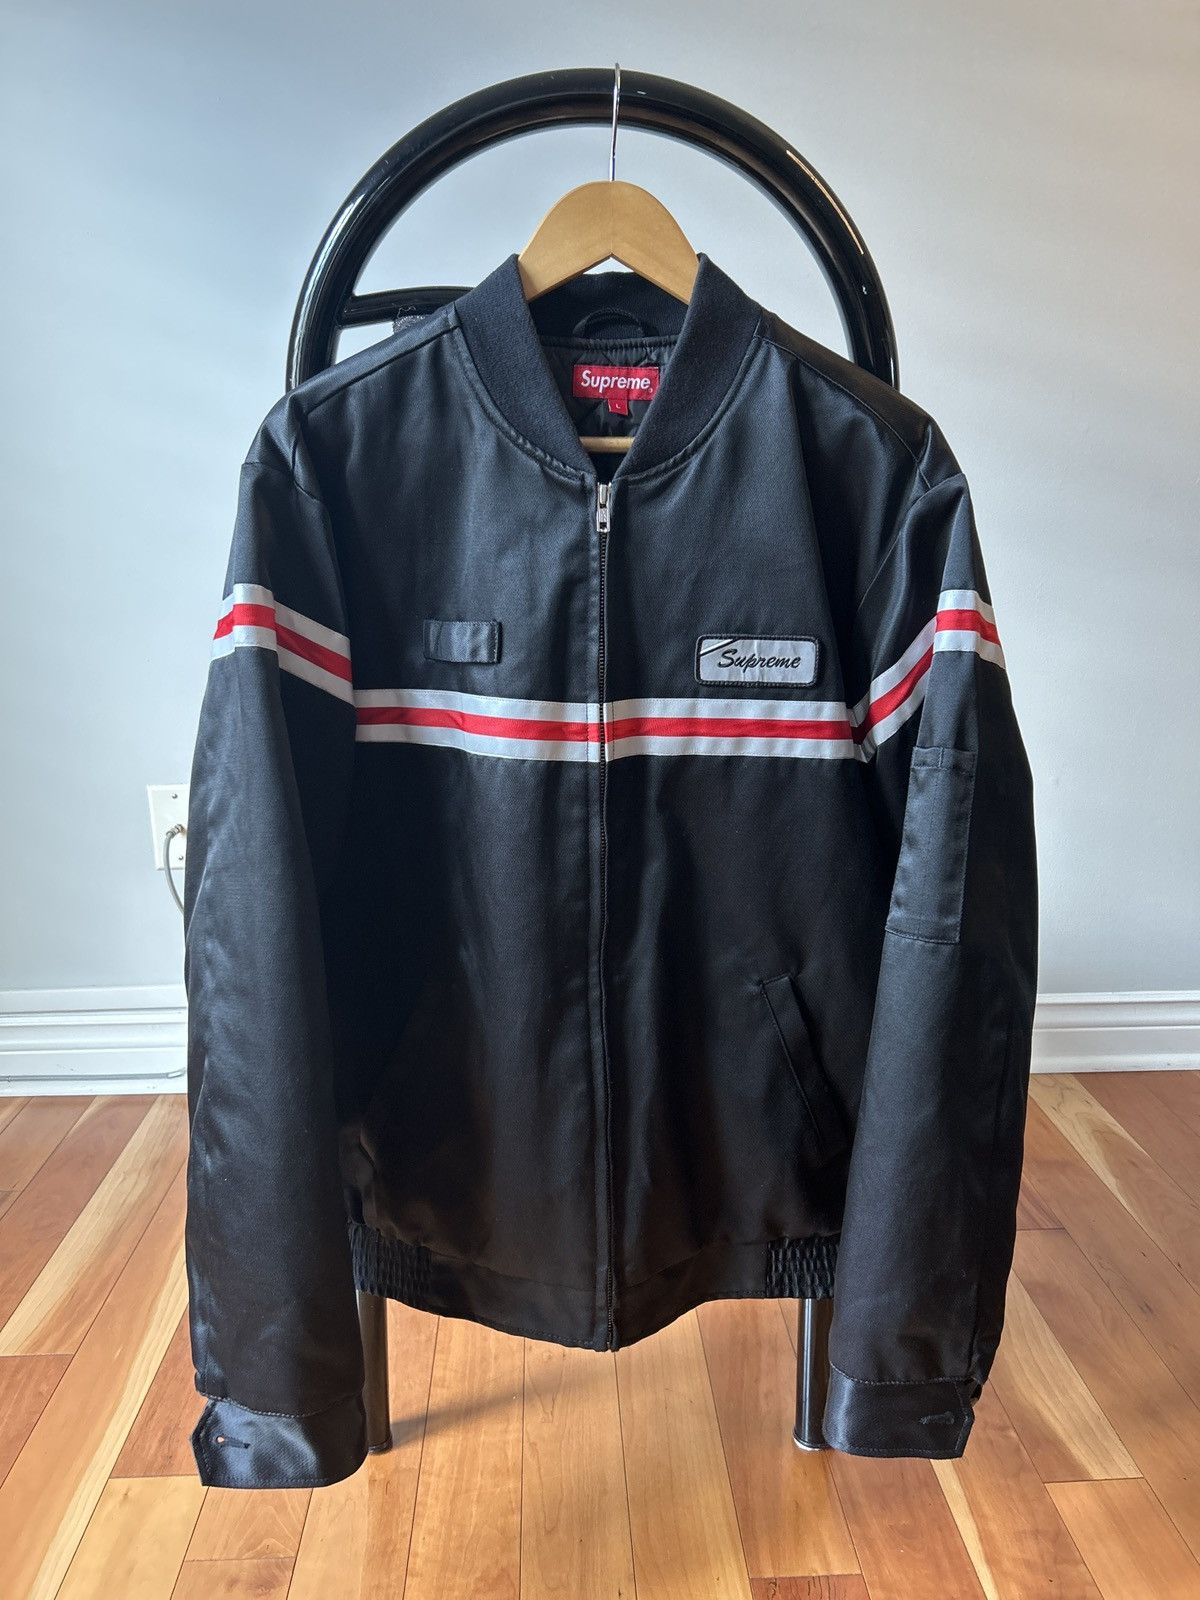 Supreme Ss18 Racing Stripe 3M Reflective Work Jacket Patch | Grailed